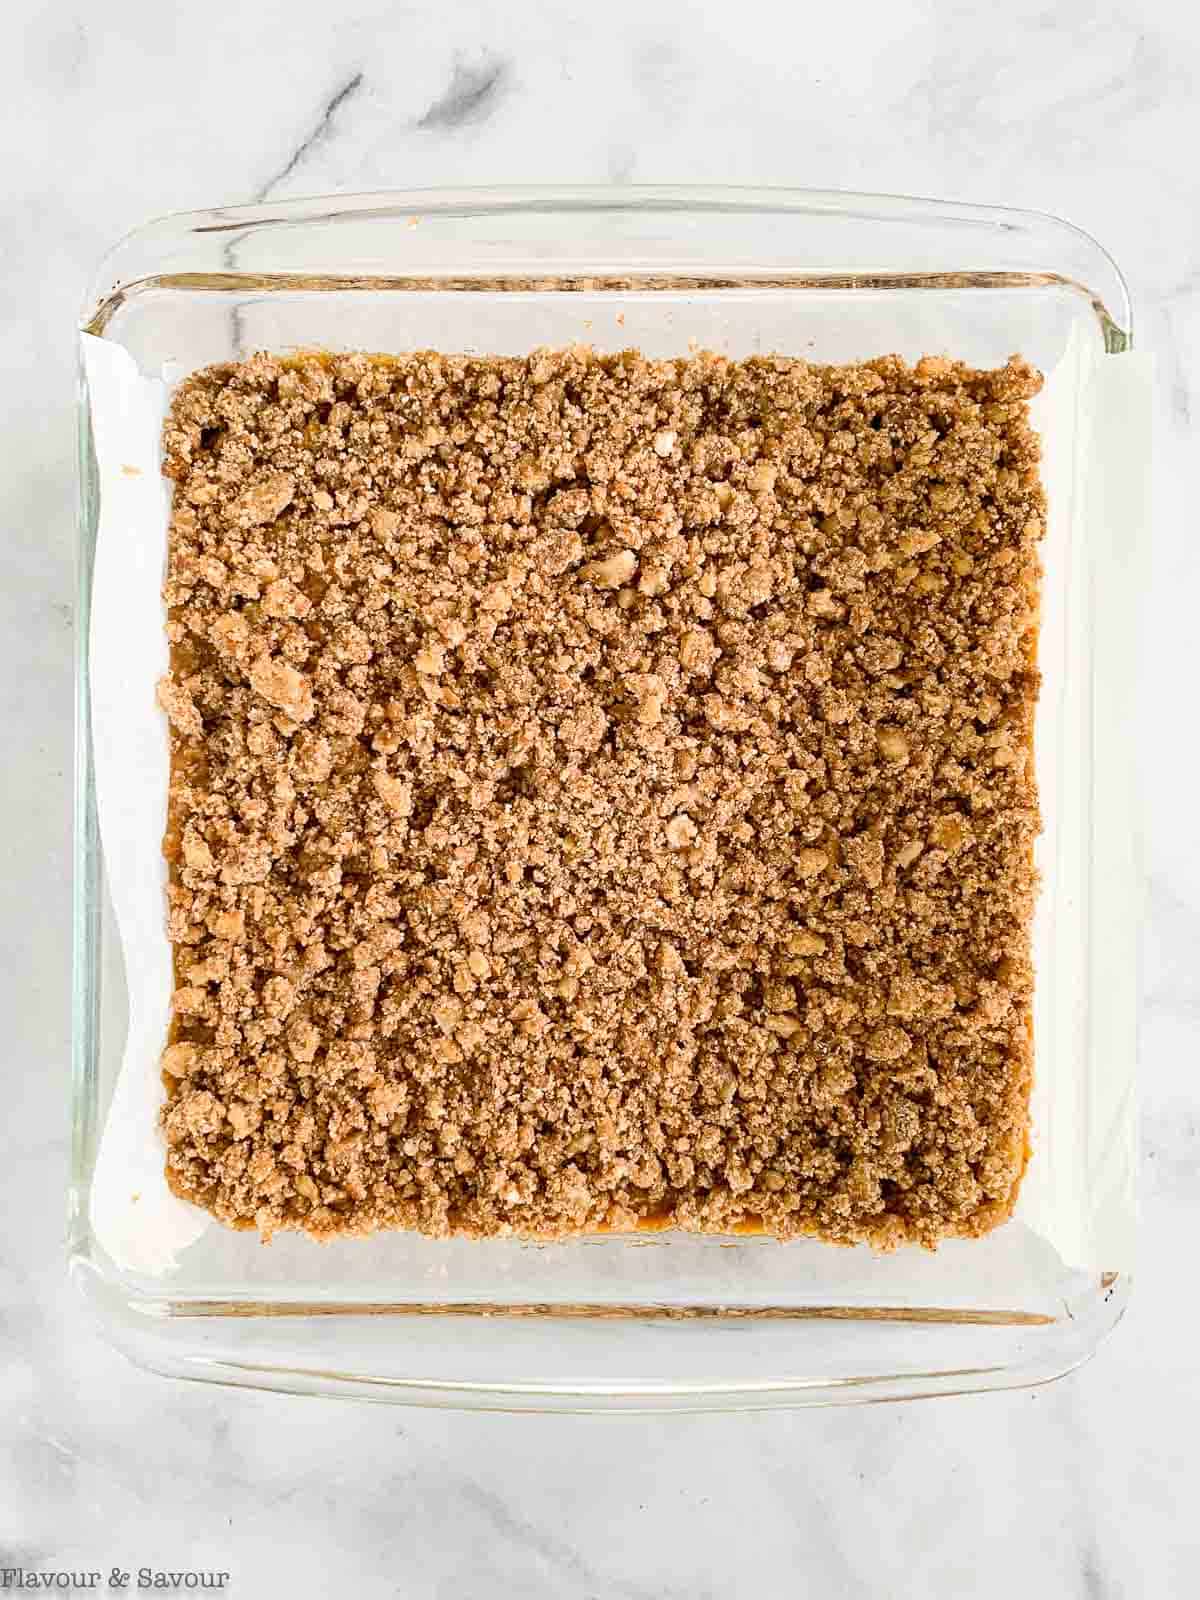 Spread the batter in a square pan and sprinkle with streusel topping.